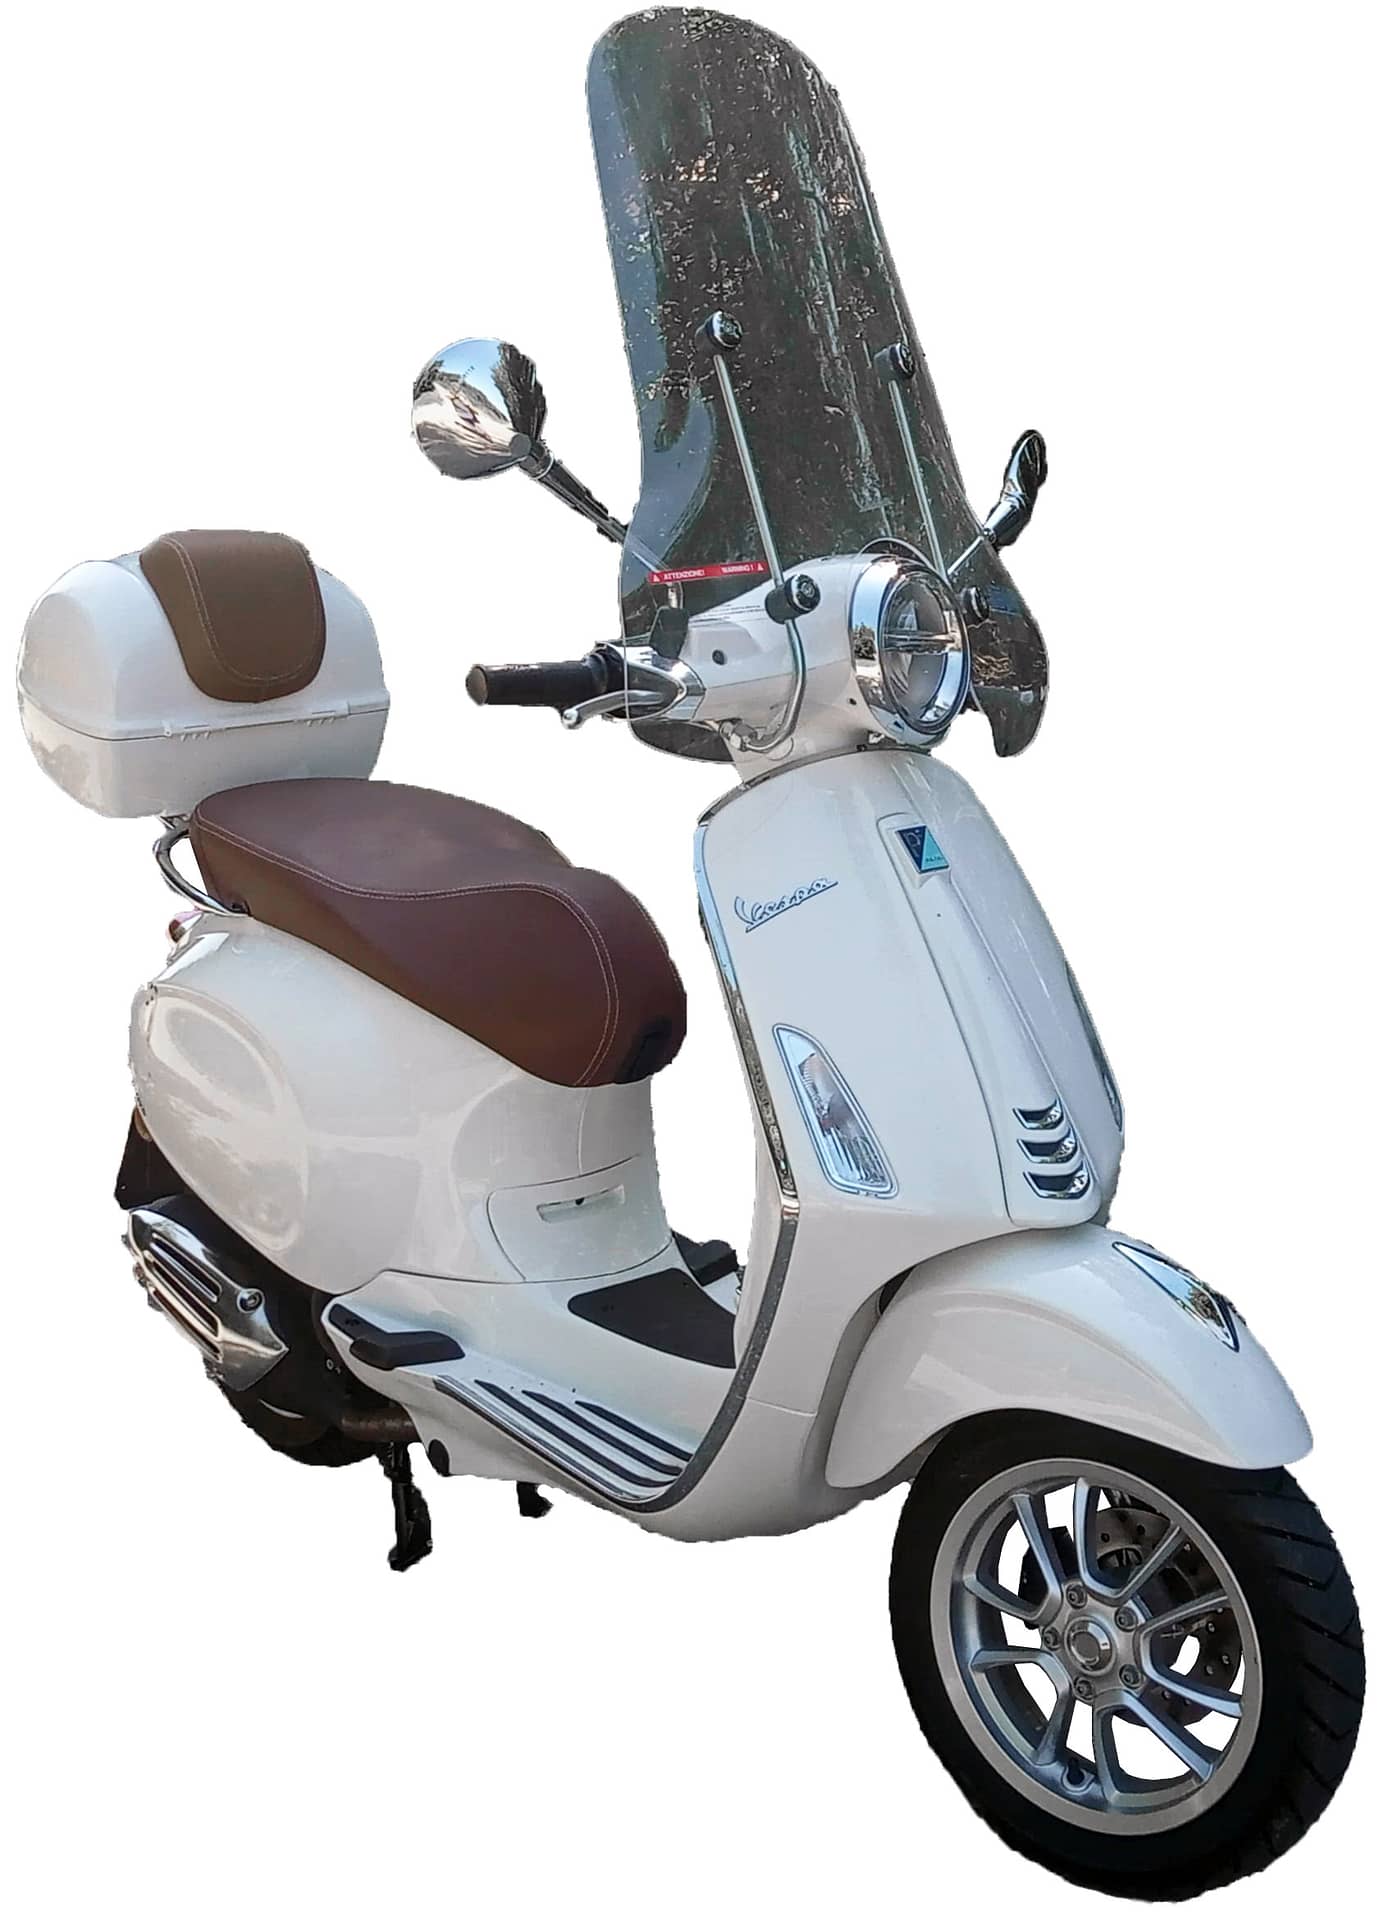 Piaggio Vespa 50 Scooter Motorcycle | Motorcycle Effects Library | Asoundeffect.com